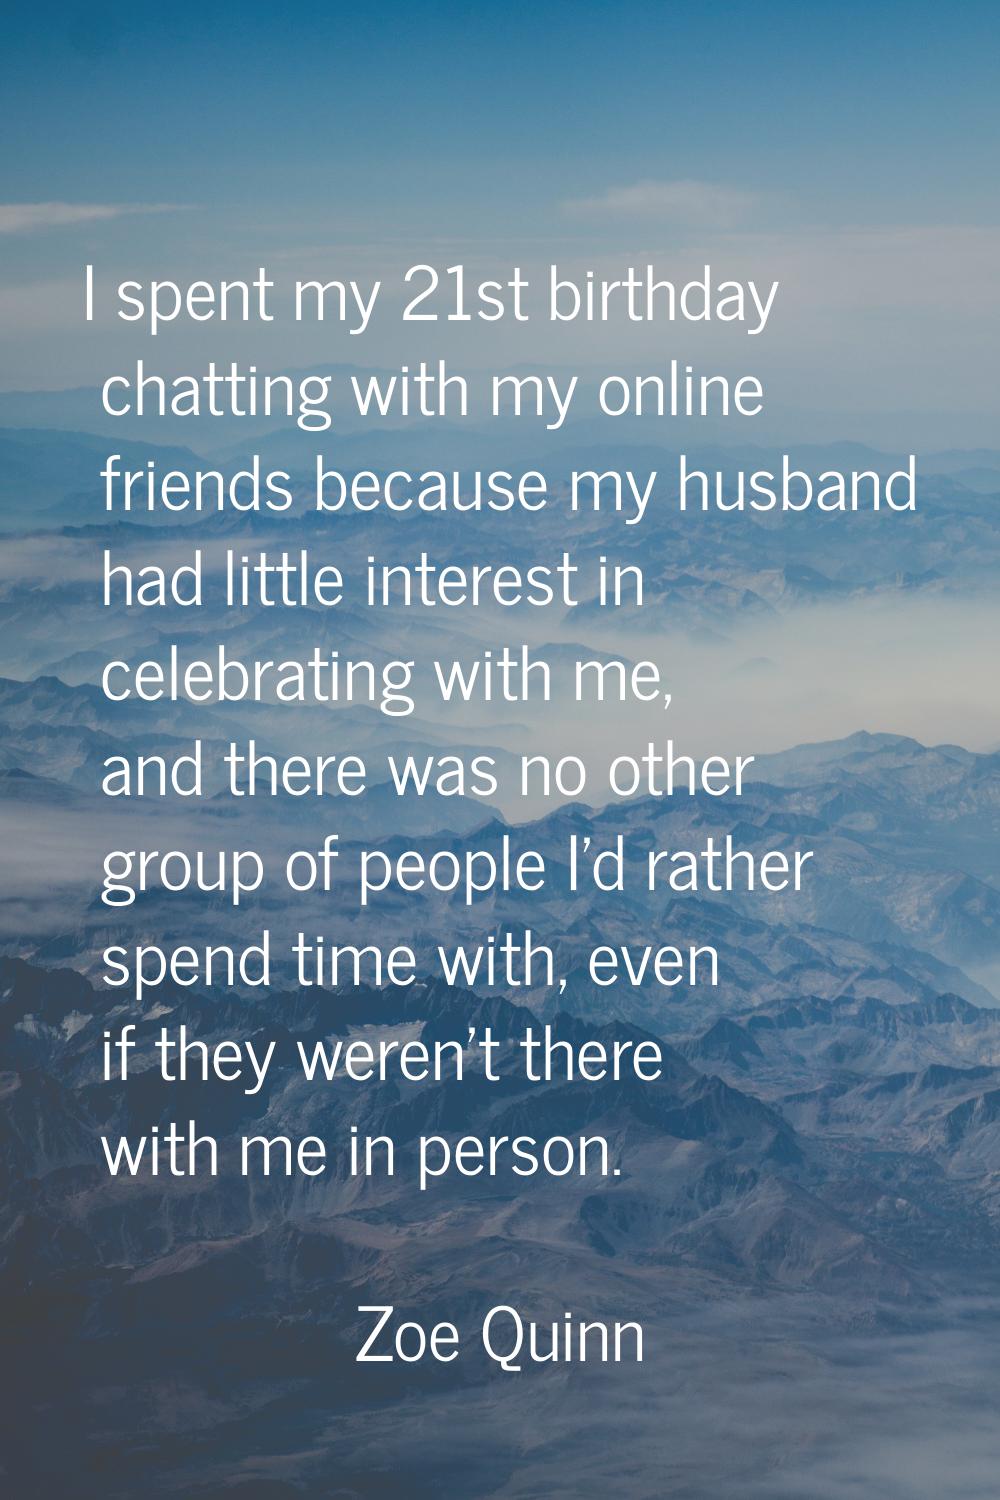 I spent my 21st birthday chatting with my online friends because my husband had little interest in 